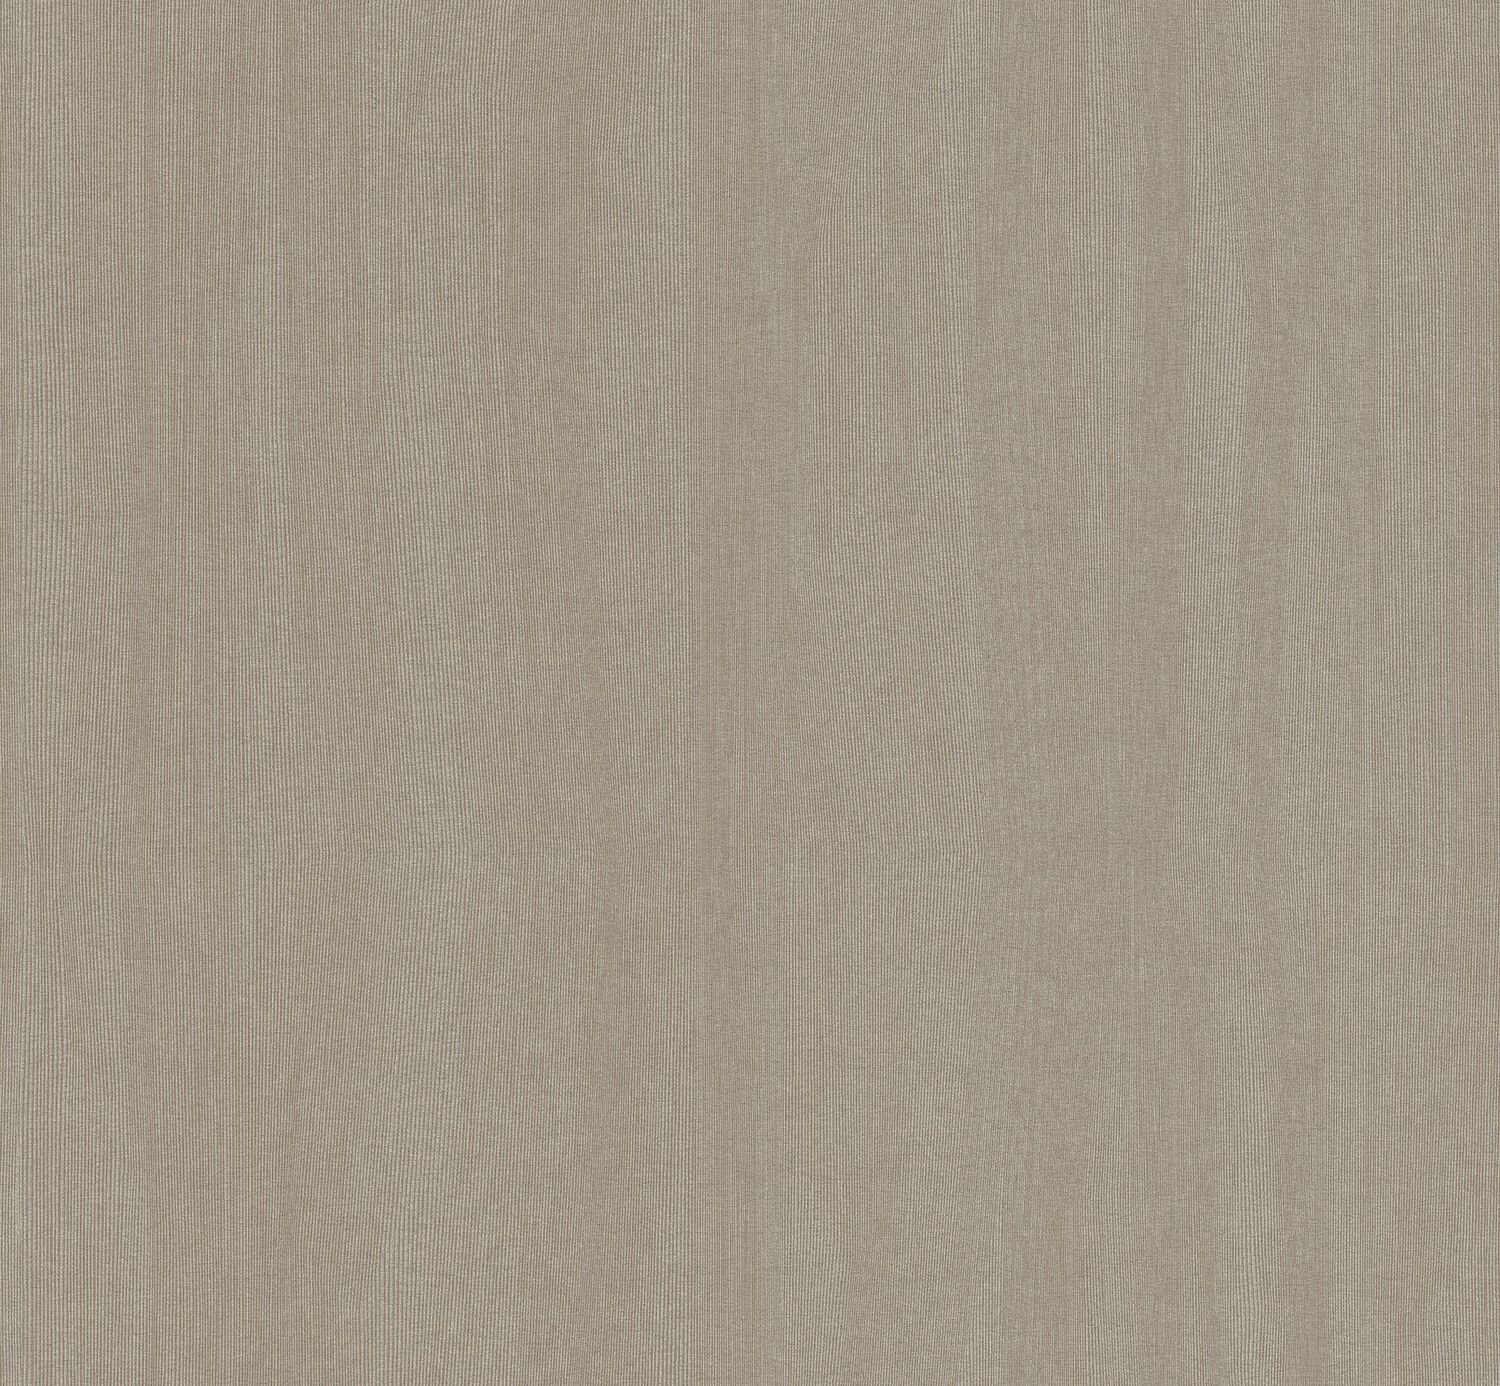 Juxtapose - Timber - 7020 - 04 - Half Yard Tileable Swatches